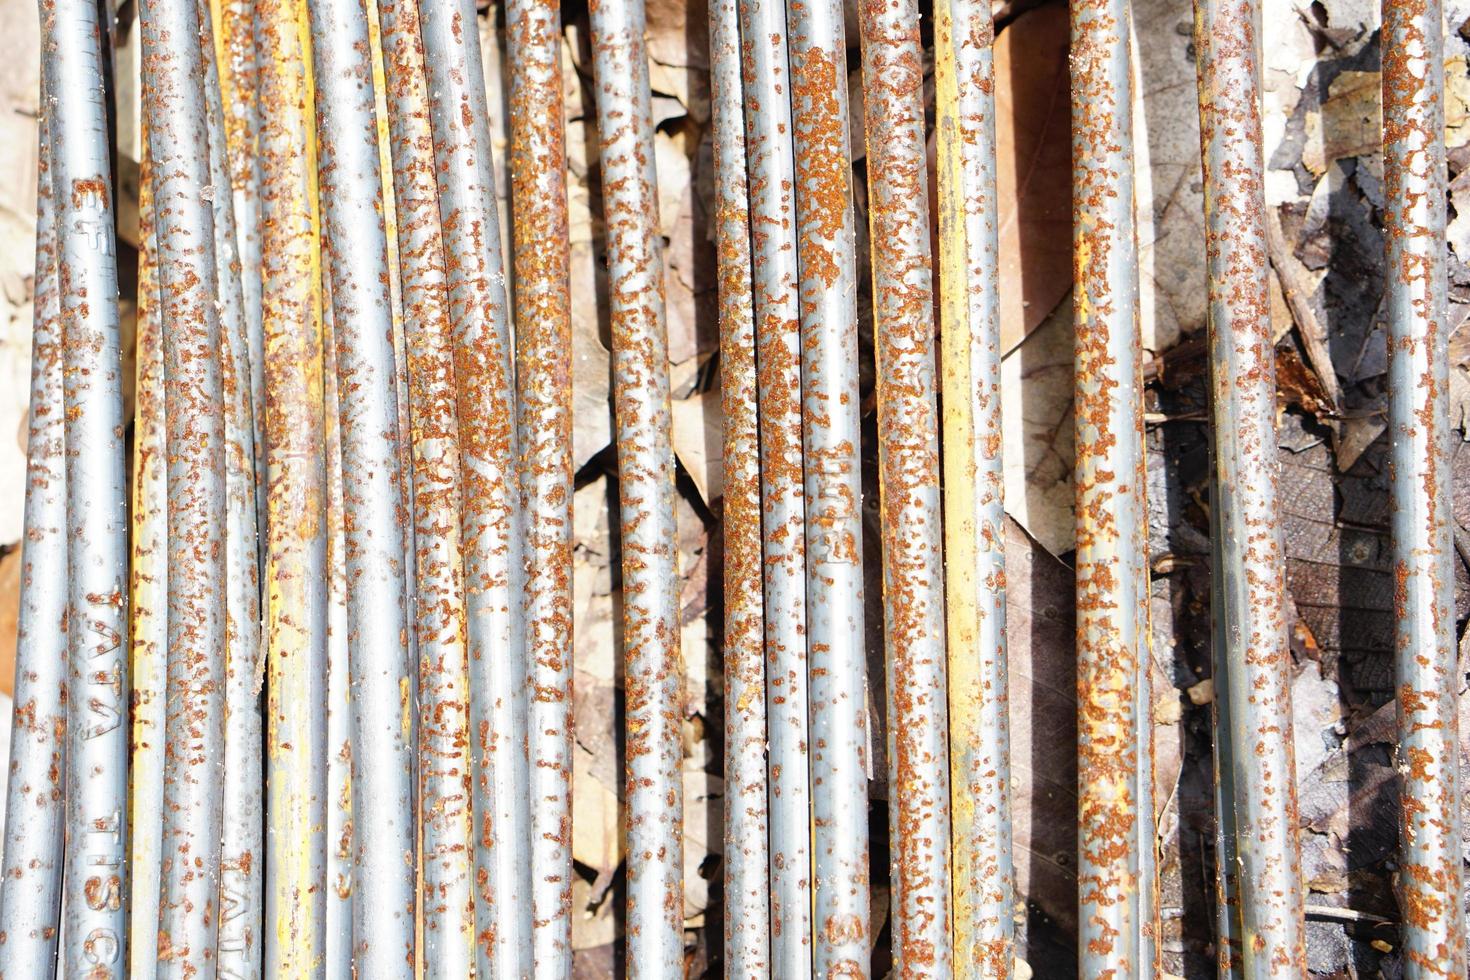 Steel bars used to make structures in construction. photo